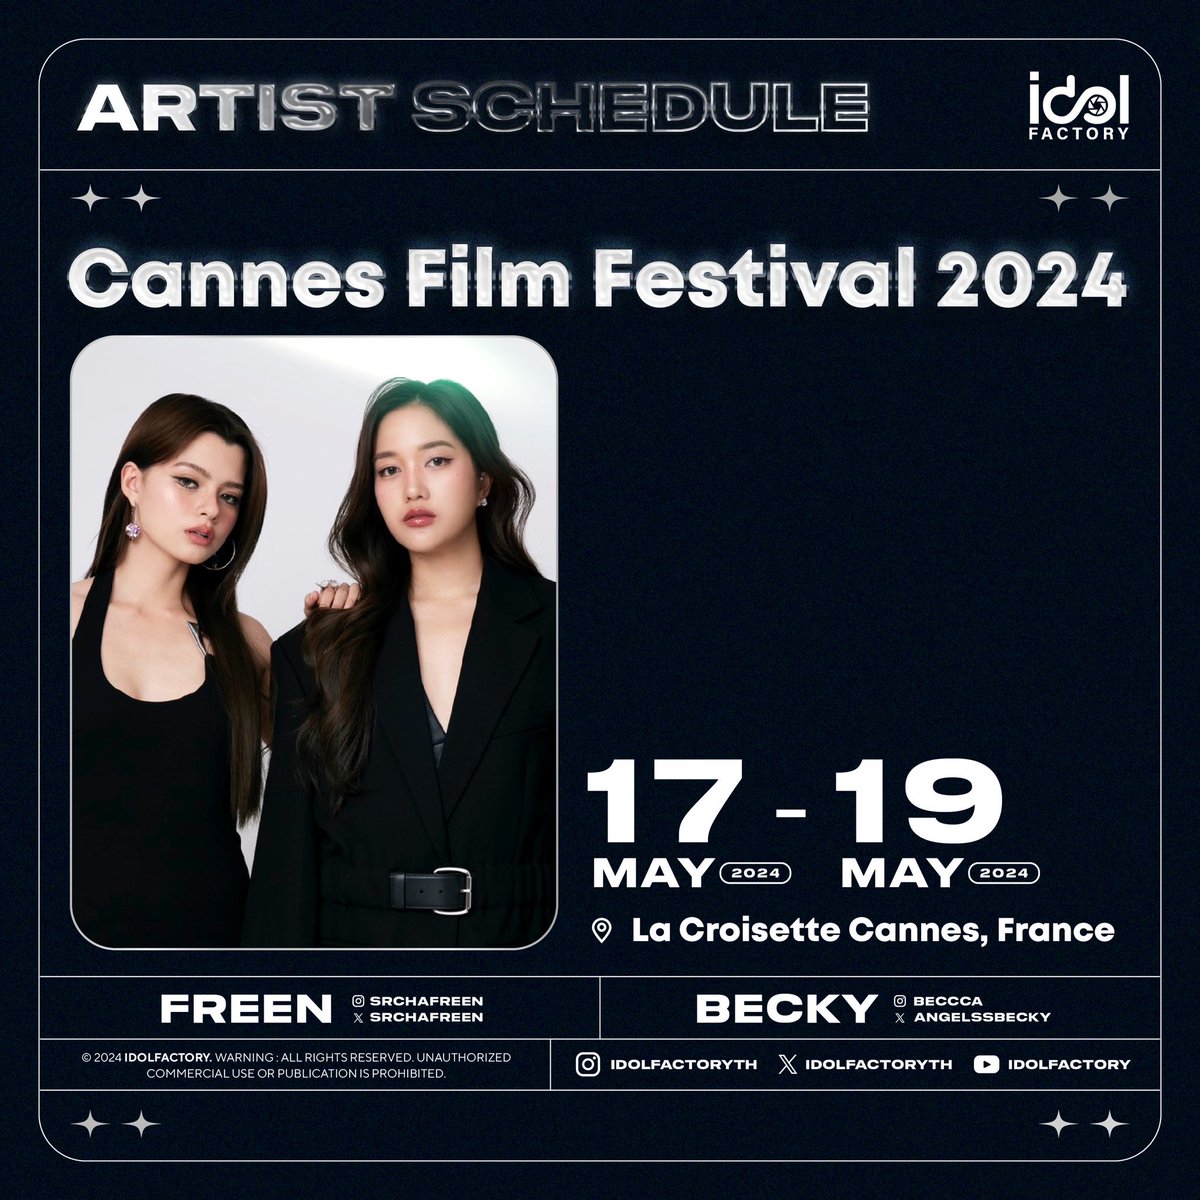 Chopard has served as the official partner to the Cannes Film Festival since 1998. Freen and Becky will be official guests of Chopard and walk the Cannes Film Festival Red Carpet. They have come SO SO FAR. We must trend this loudly and get our girls the engagement they deserve😭